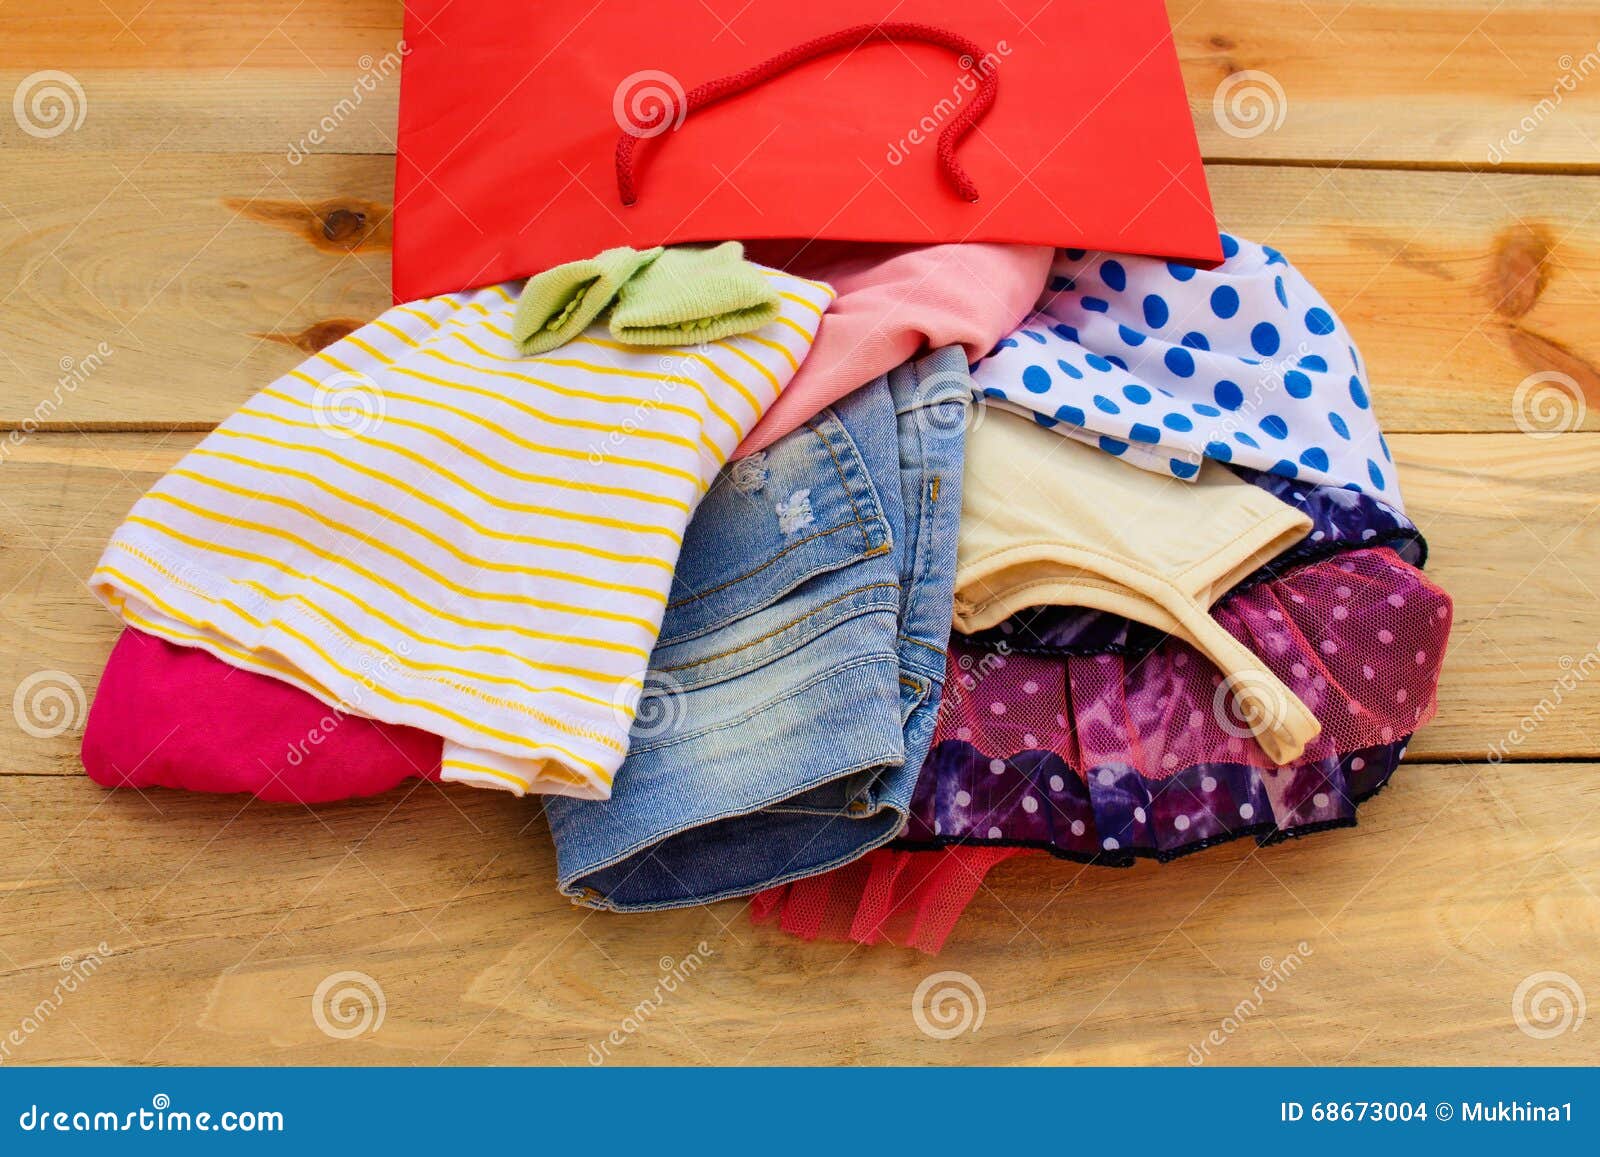 Women S Clothing Falls Out of Paper Shopping Bags Stock Photo - Image ...